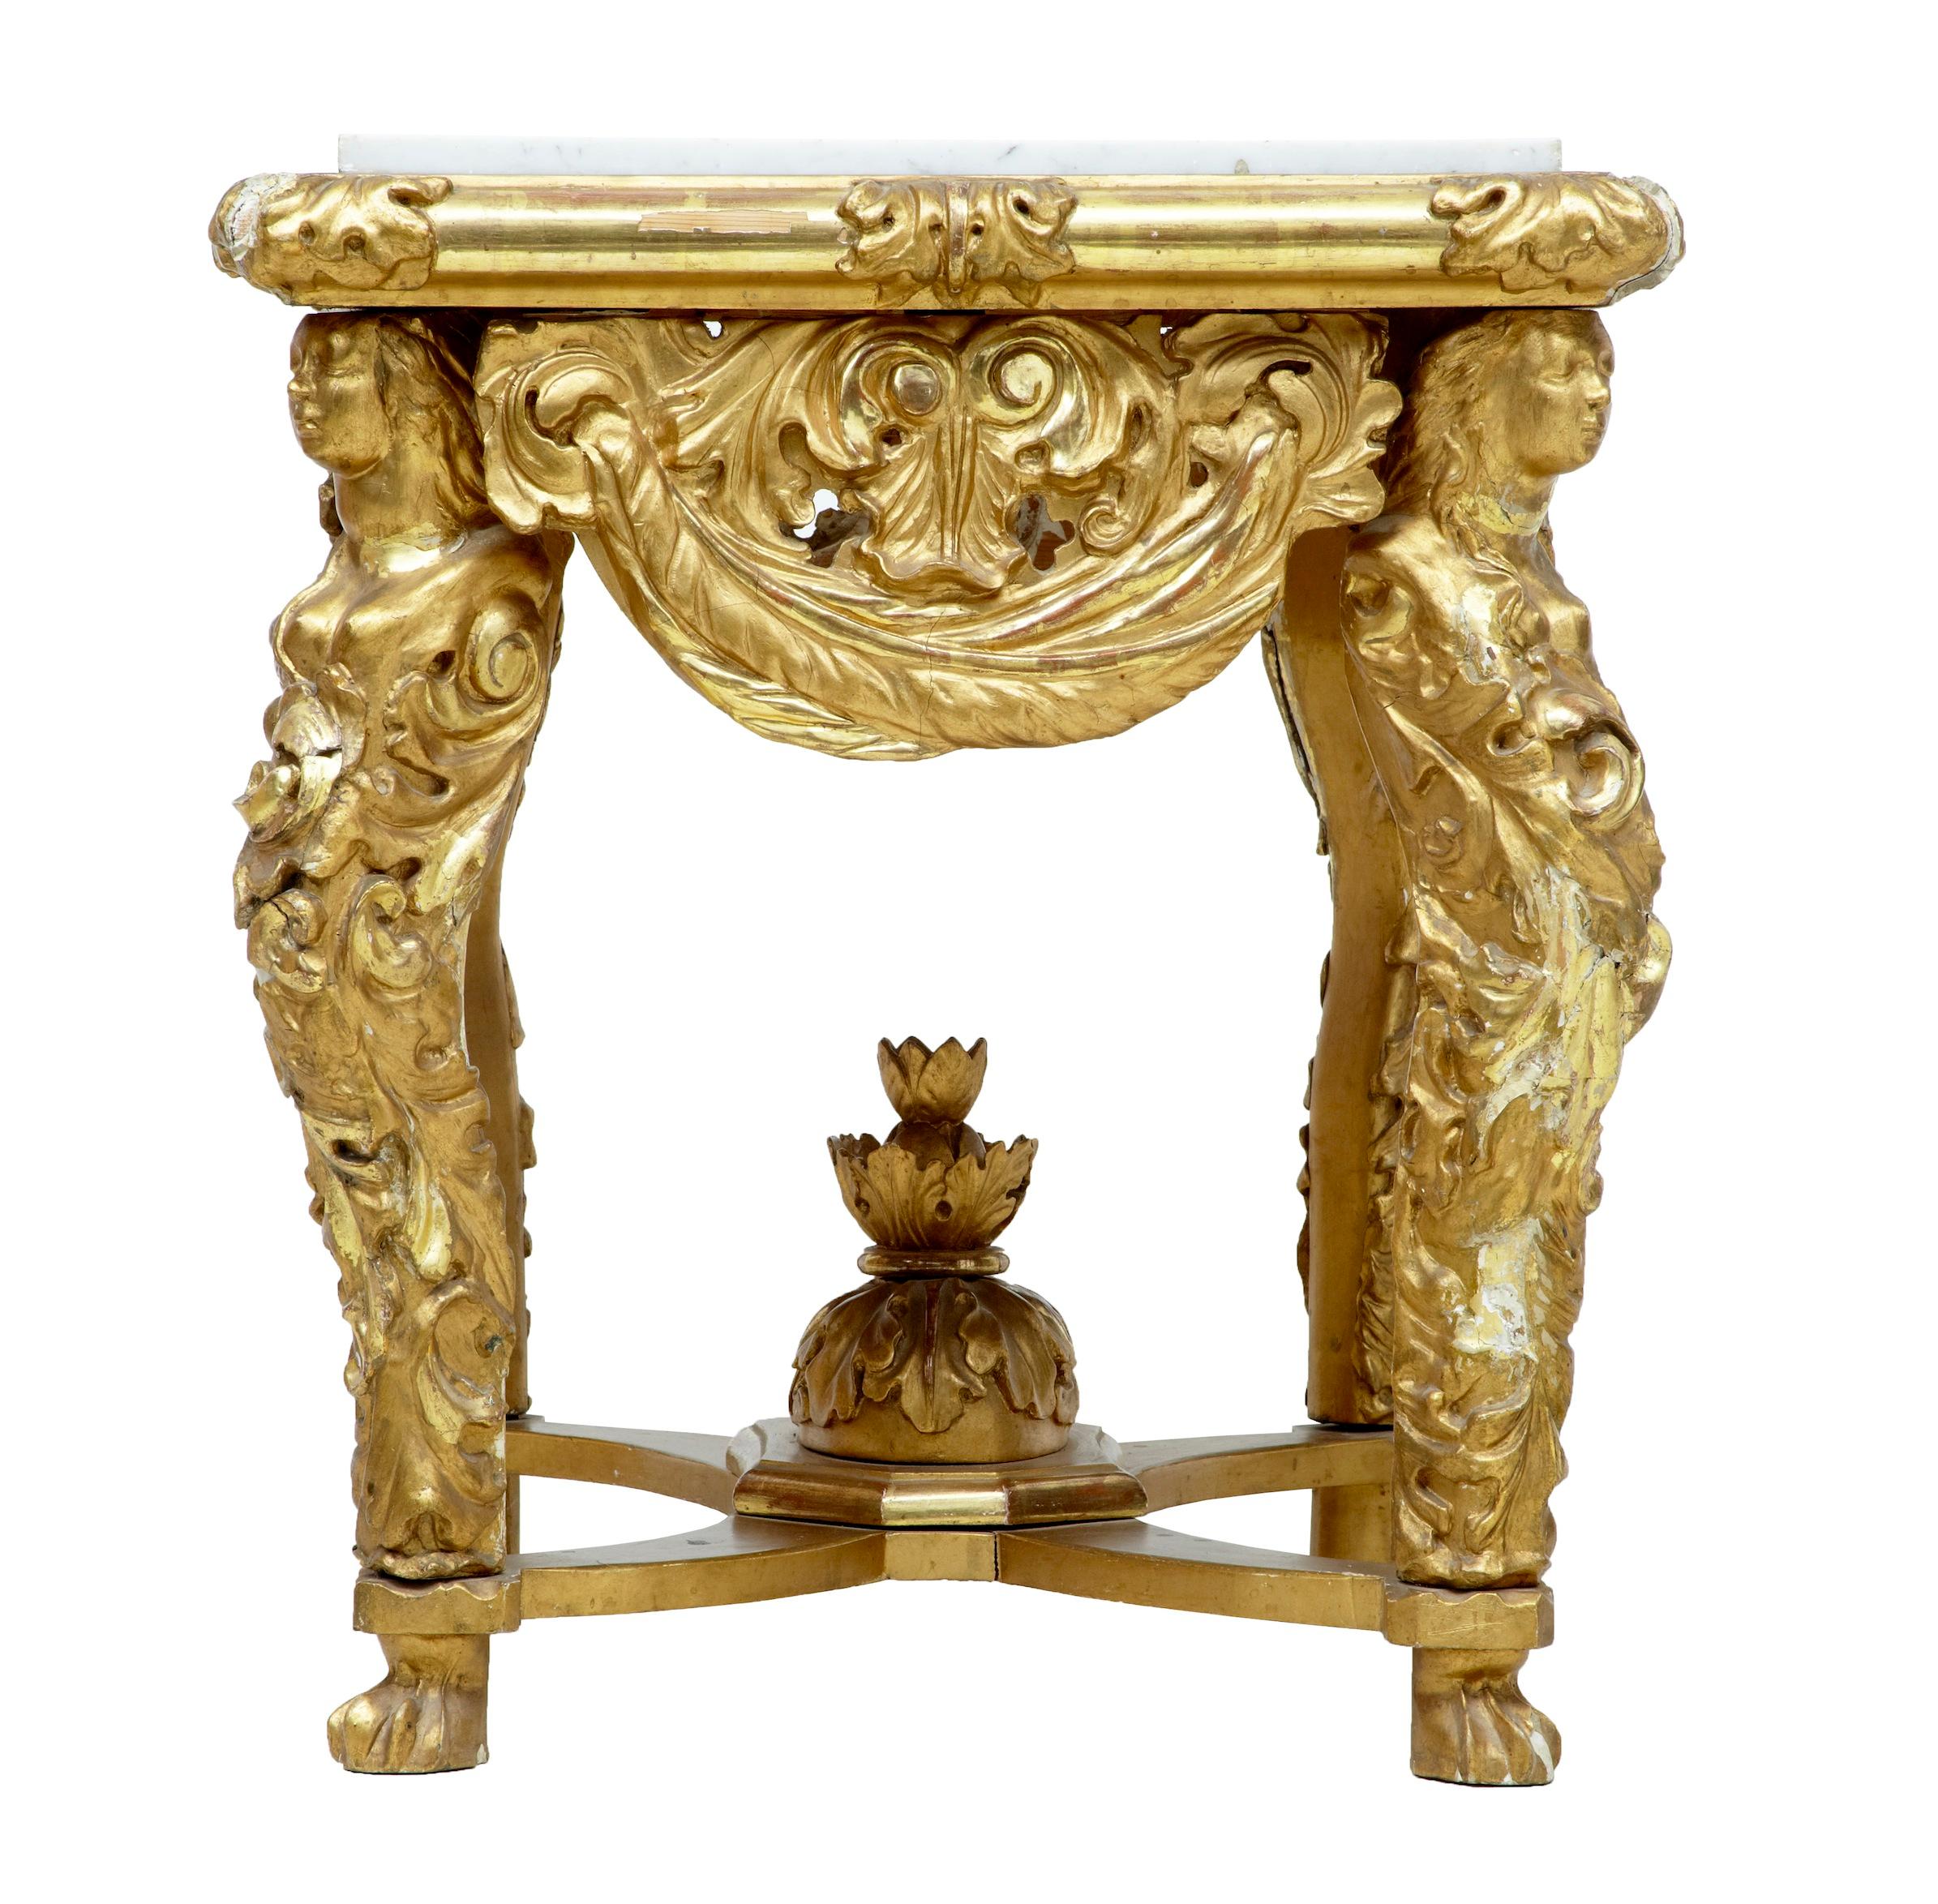 Giltwood Italian 19th Century Carved Gilt Marble-Top Center Table